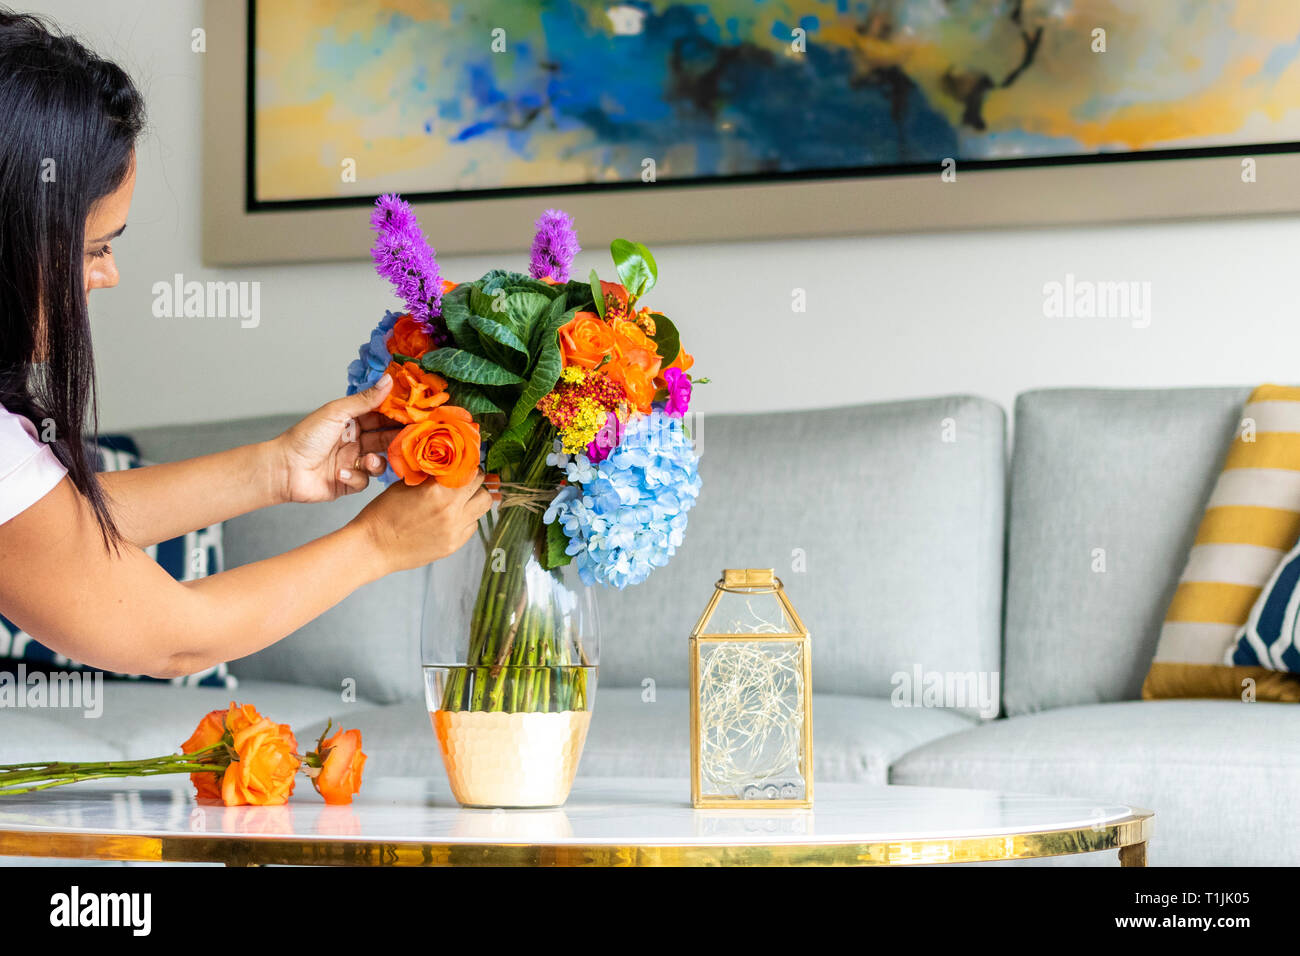 Woman arranging a bouquet of flowers Stock Photo